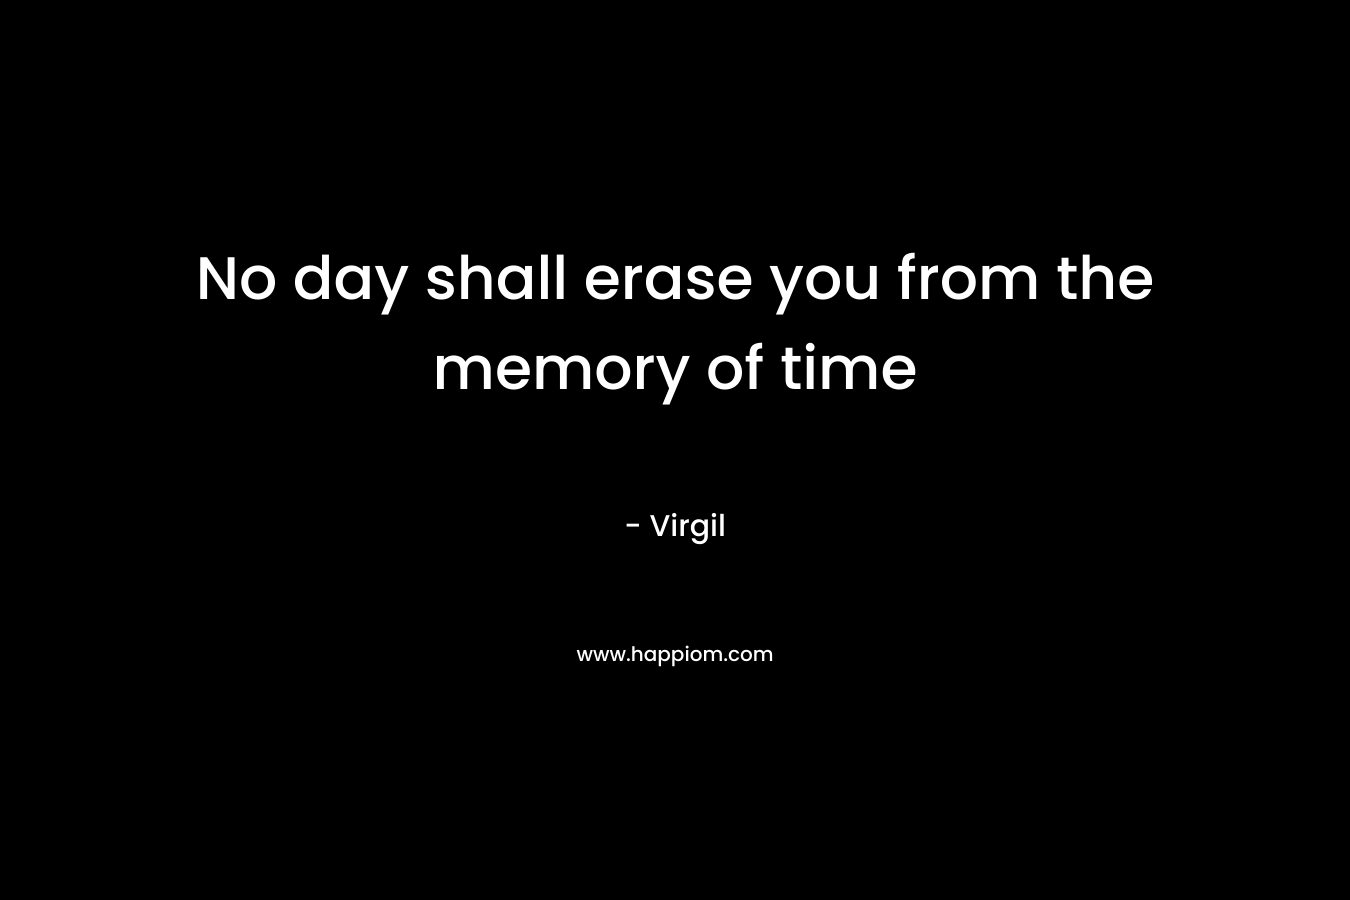 No day shall erase you from the memory of time